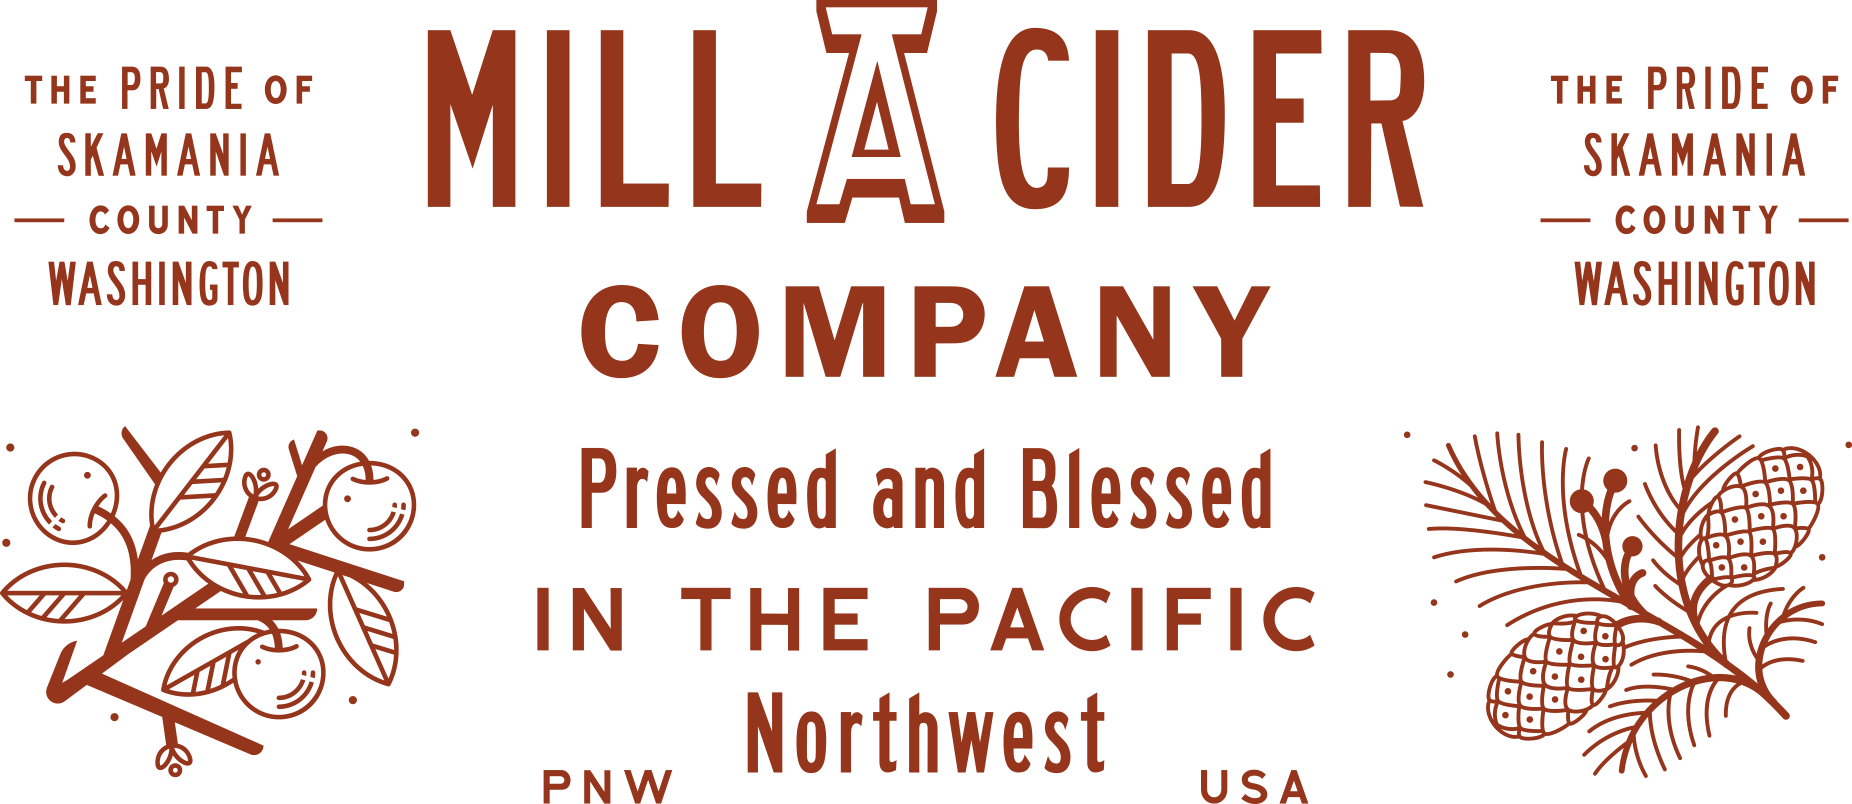 Mill A Cider Company, Pressed and Blessed in the Pacific Northwest